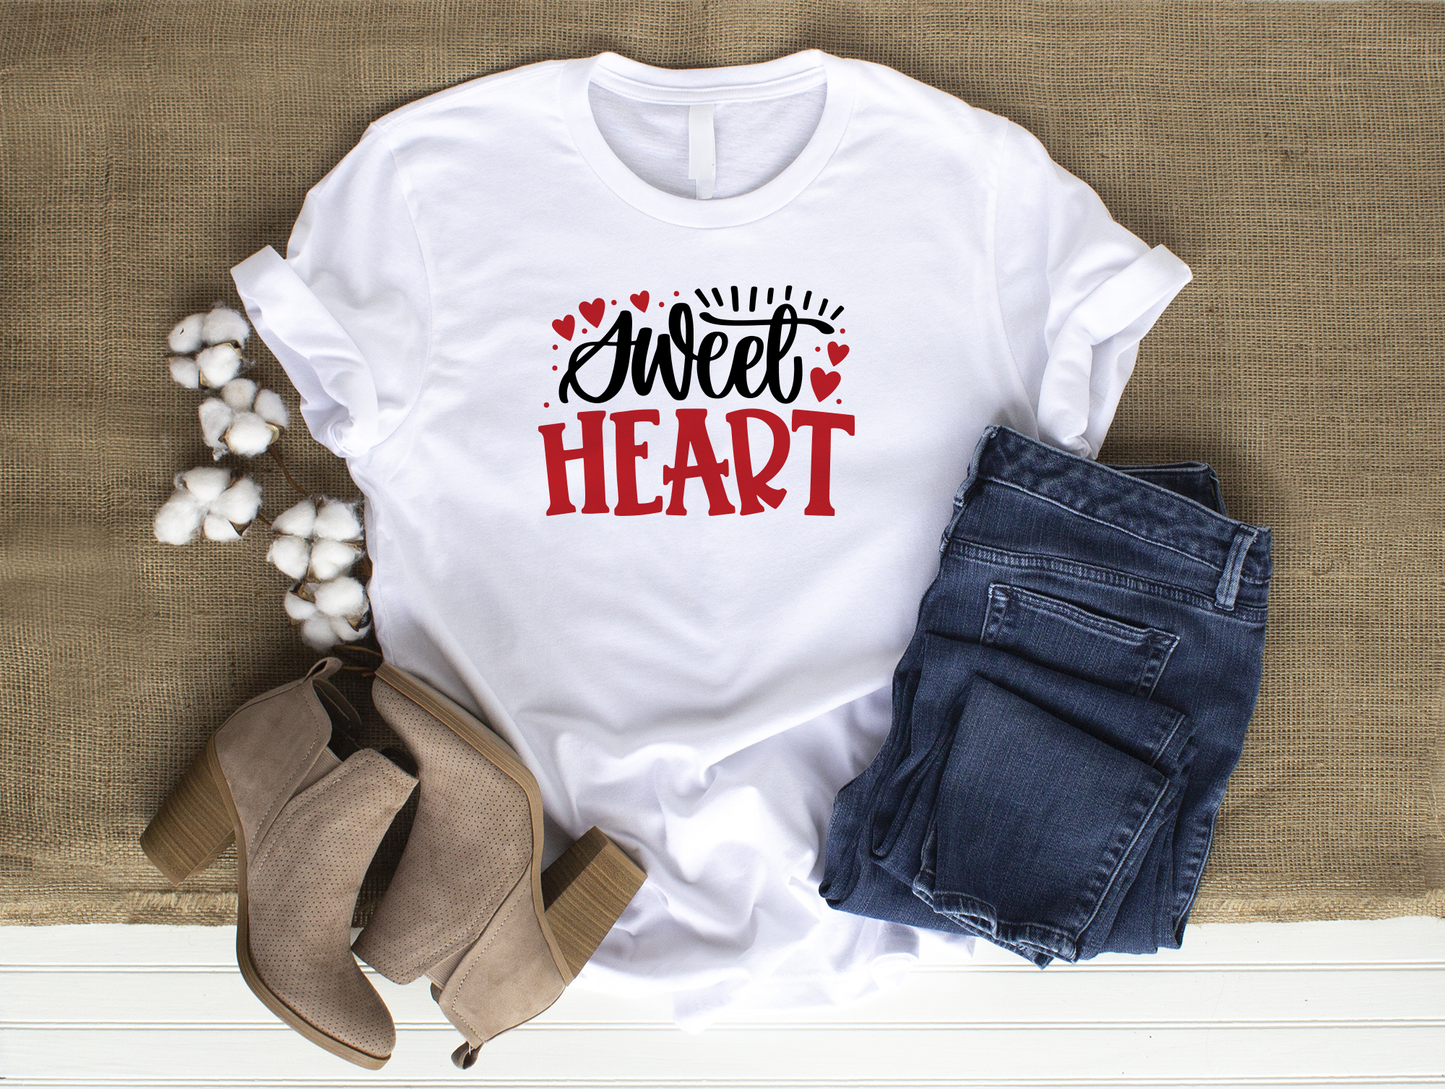 Sweet Heart Cute Comfy Valentine's Day T-Shirt